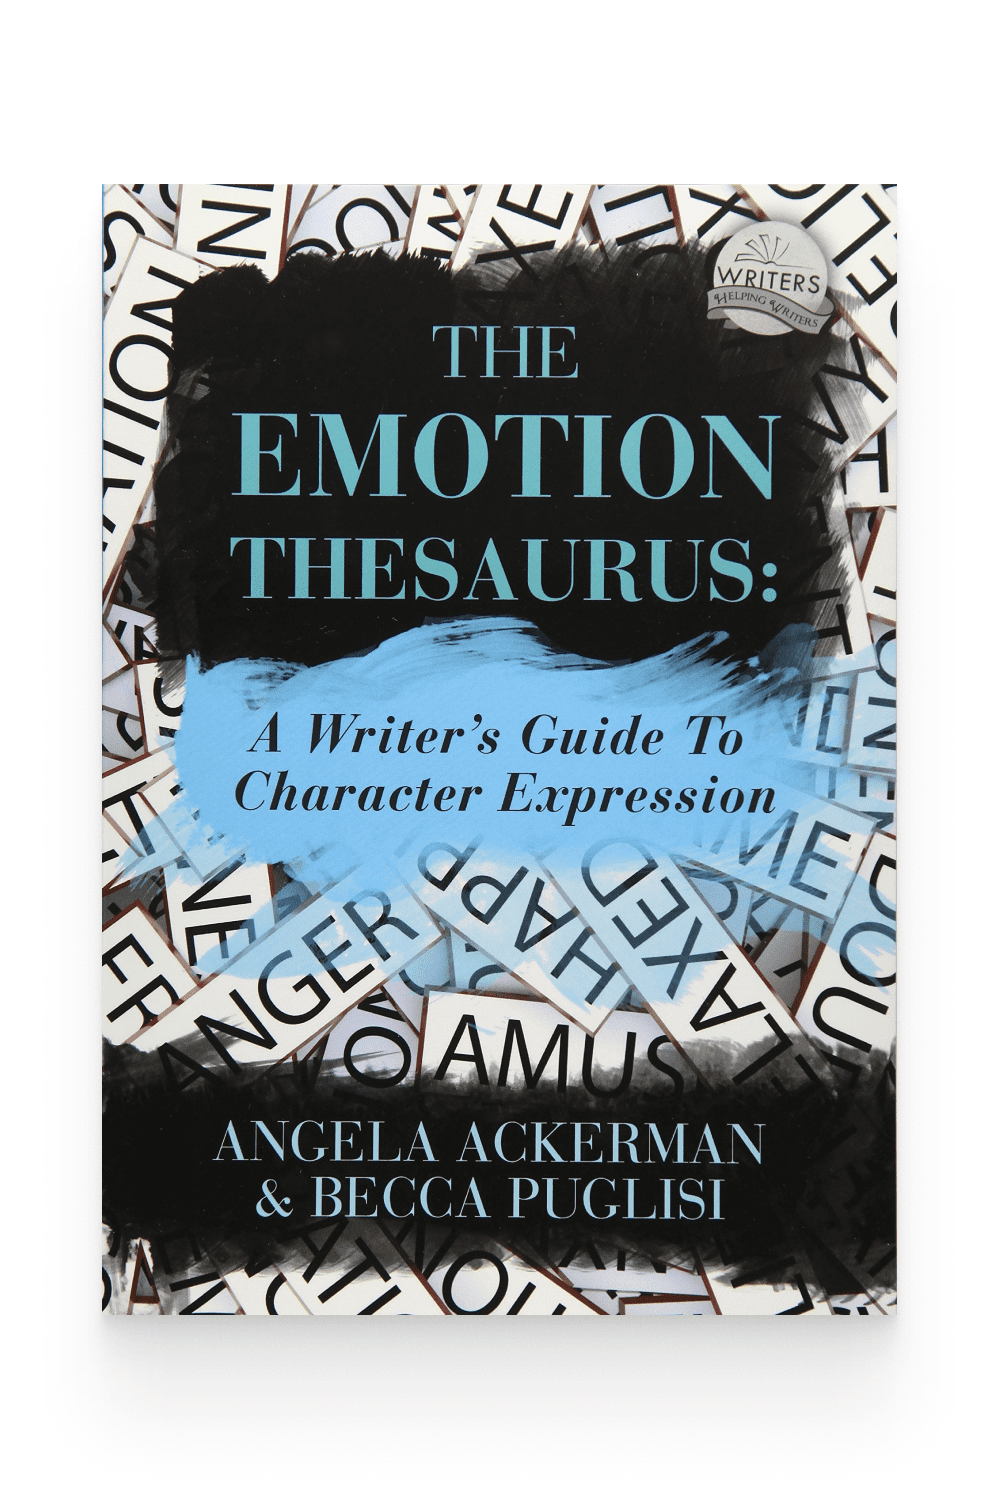 The book The Emotion Thesaurus.